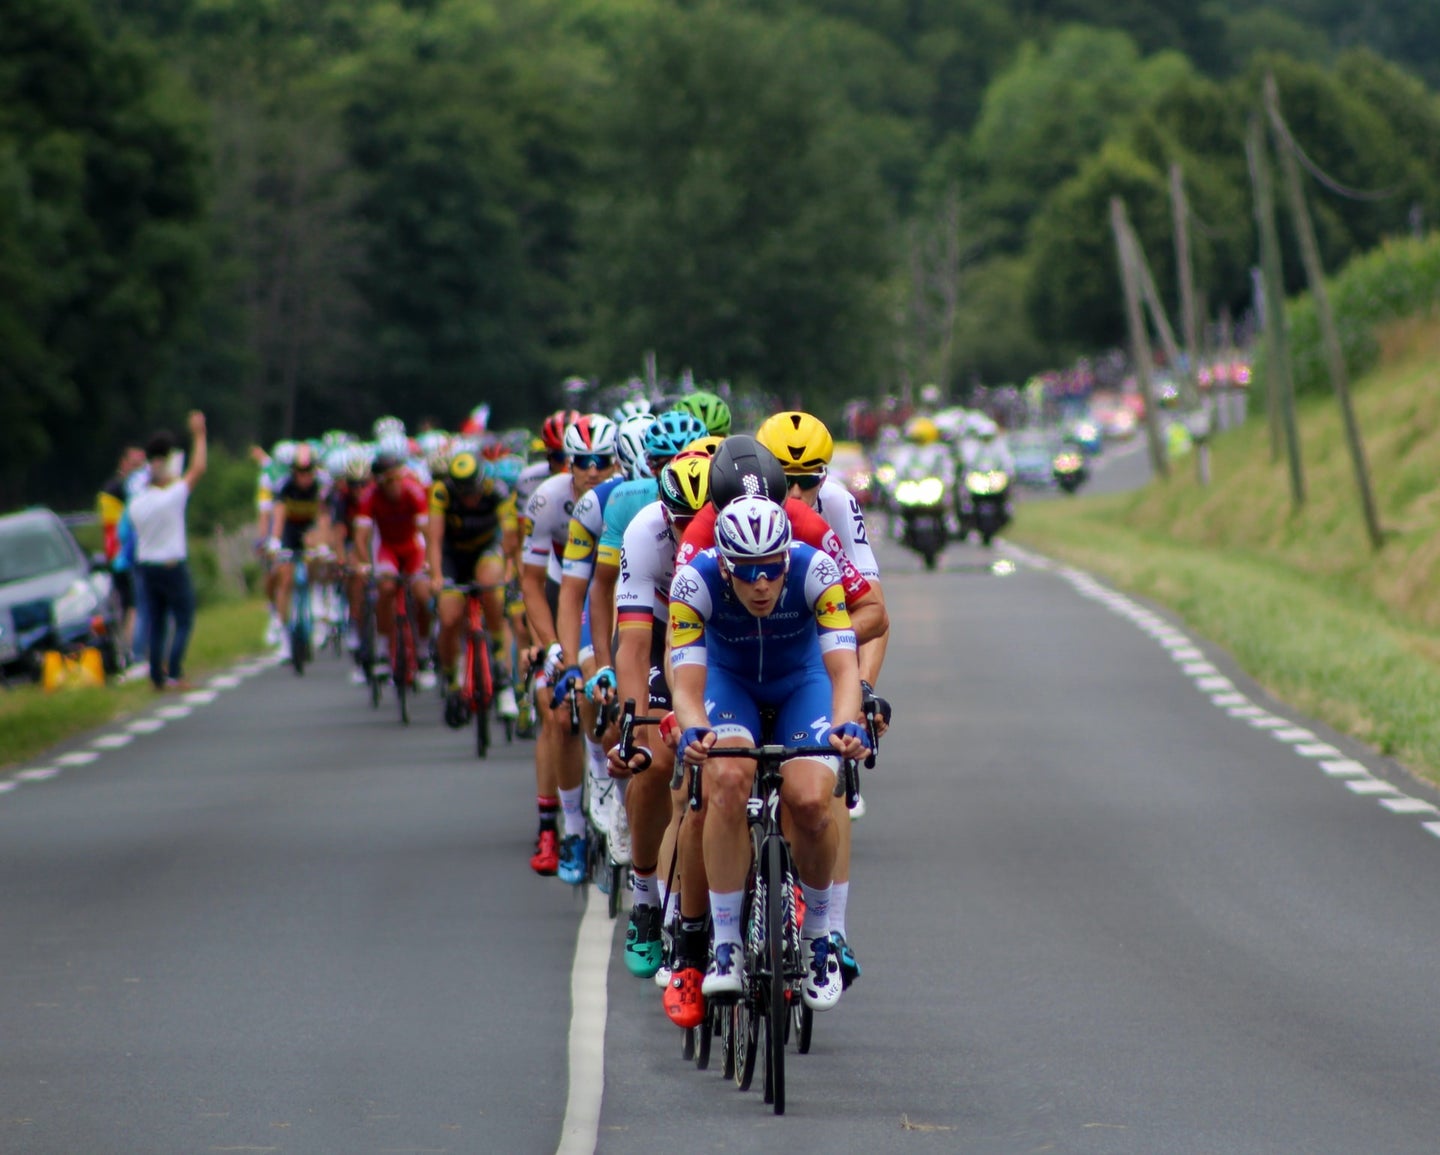 Tour de France bicyclists on a French Road in 2017